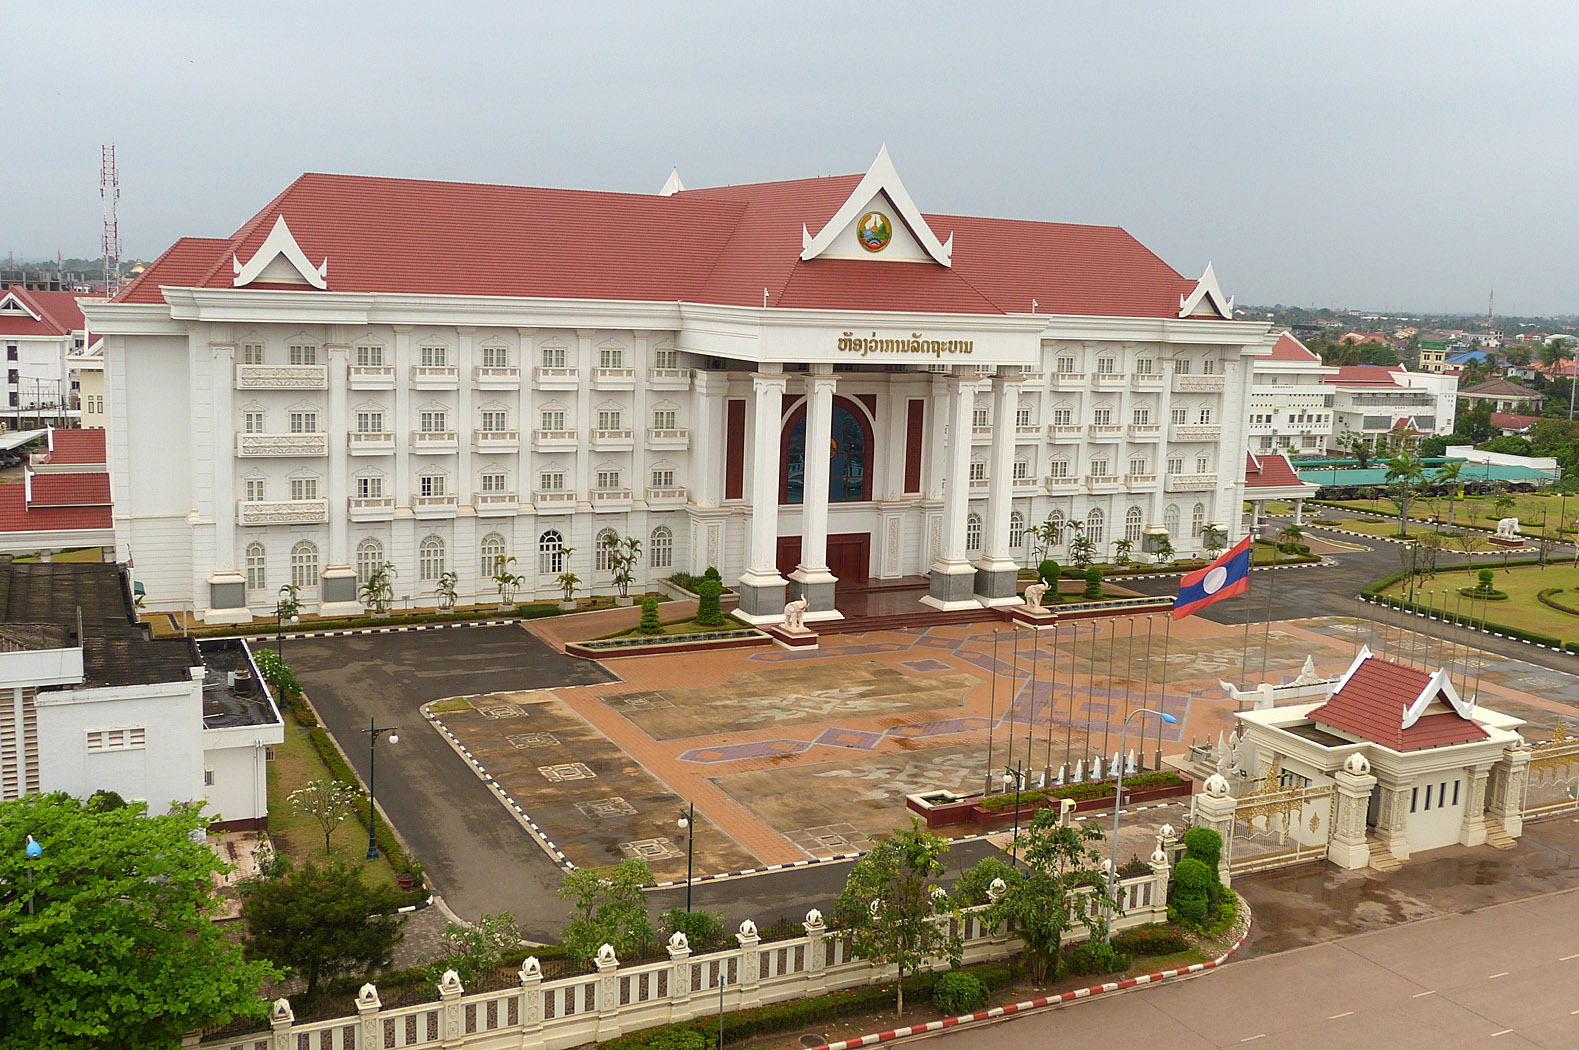 Government Administrative Office, Vientiane, Laos